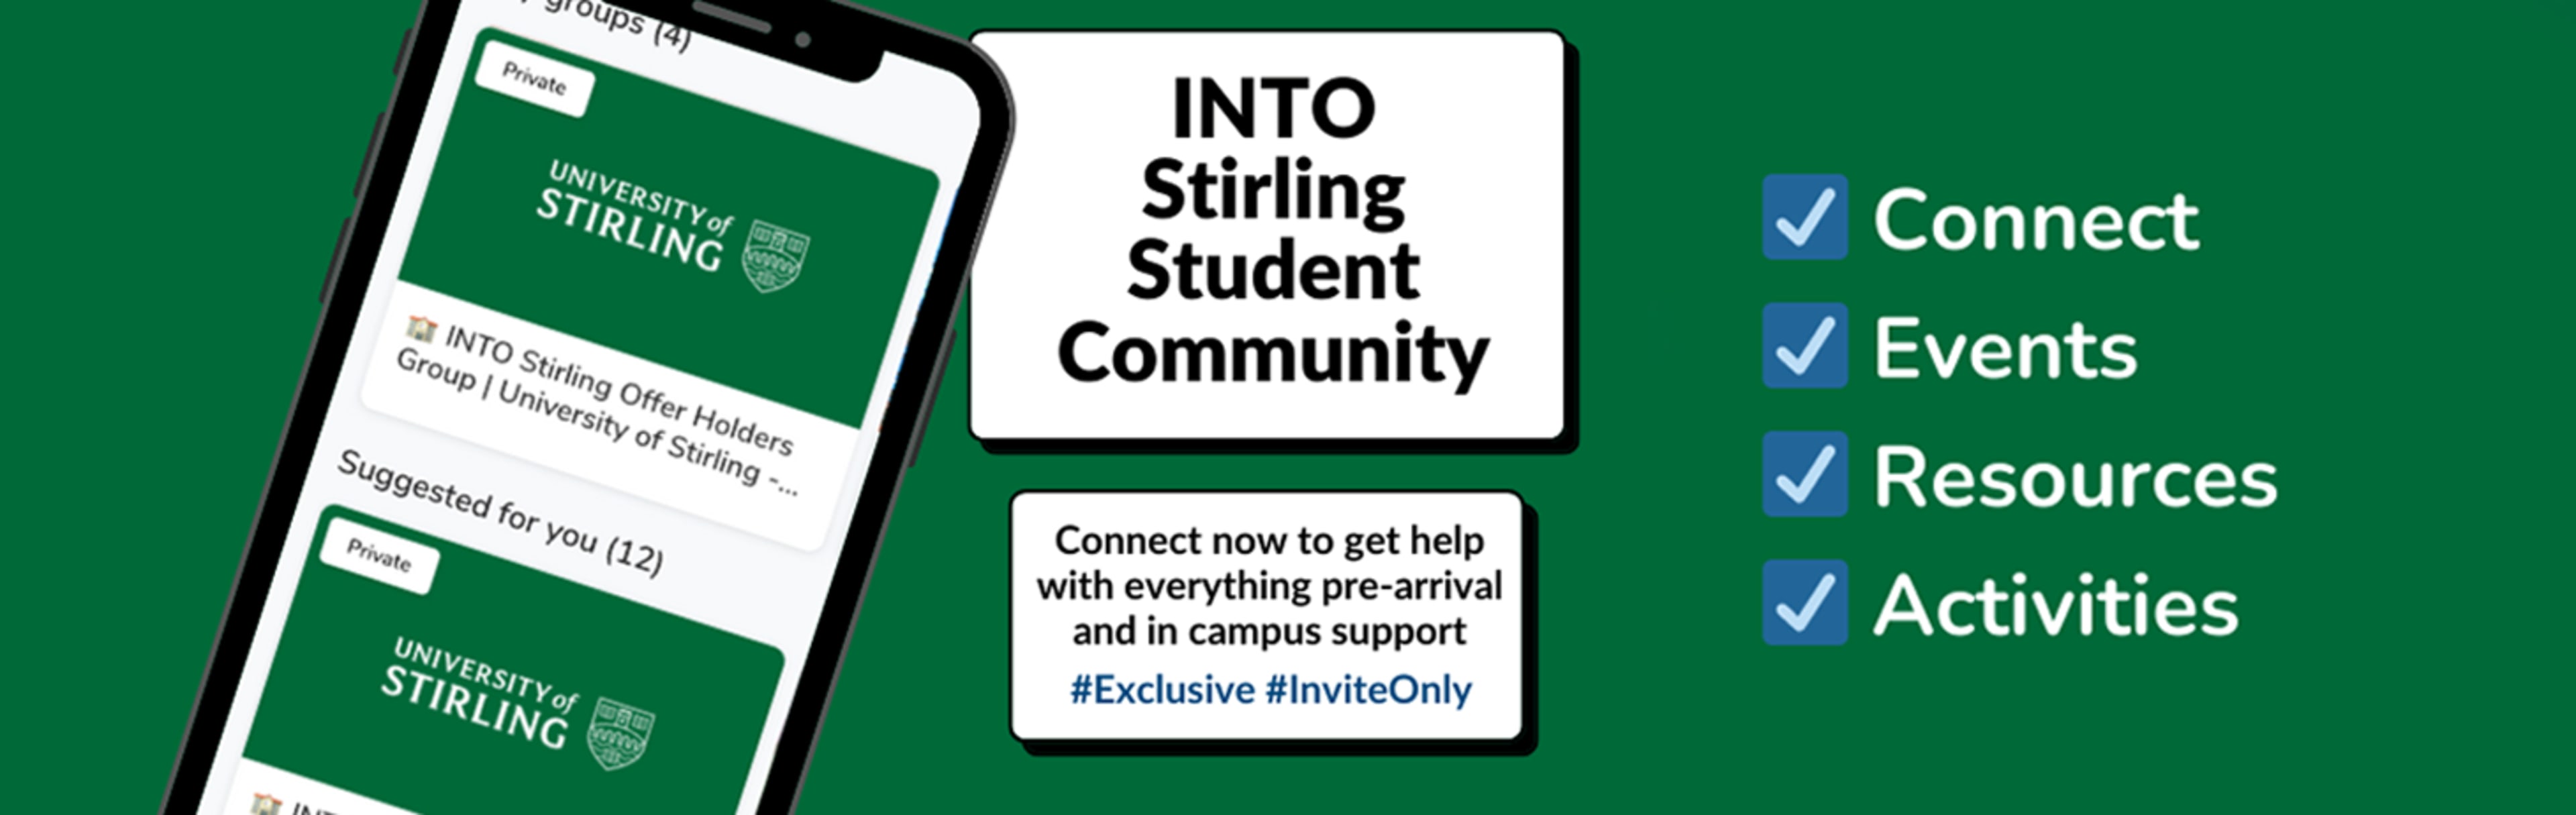 INTO Stirling Student Community